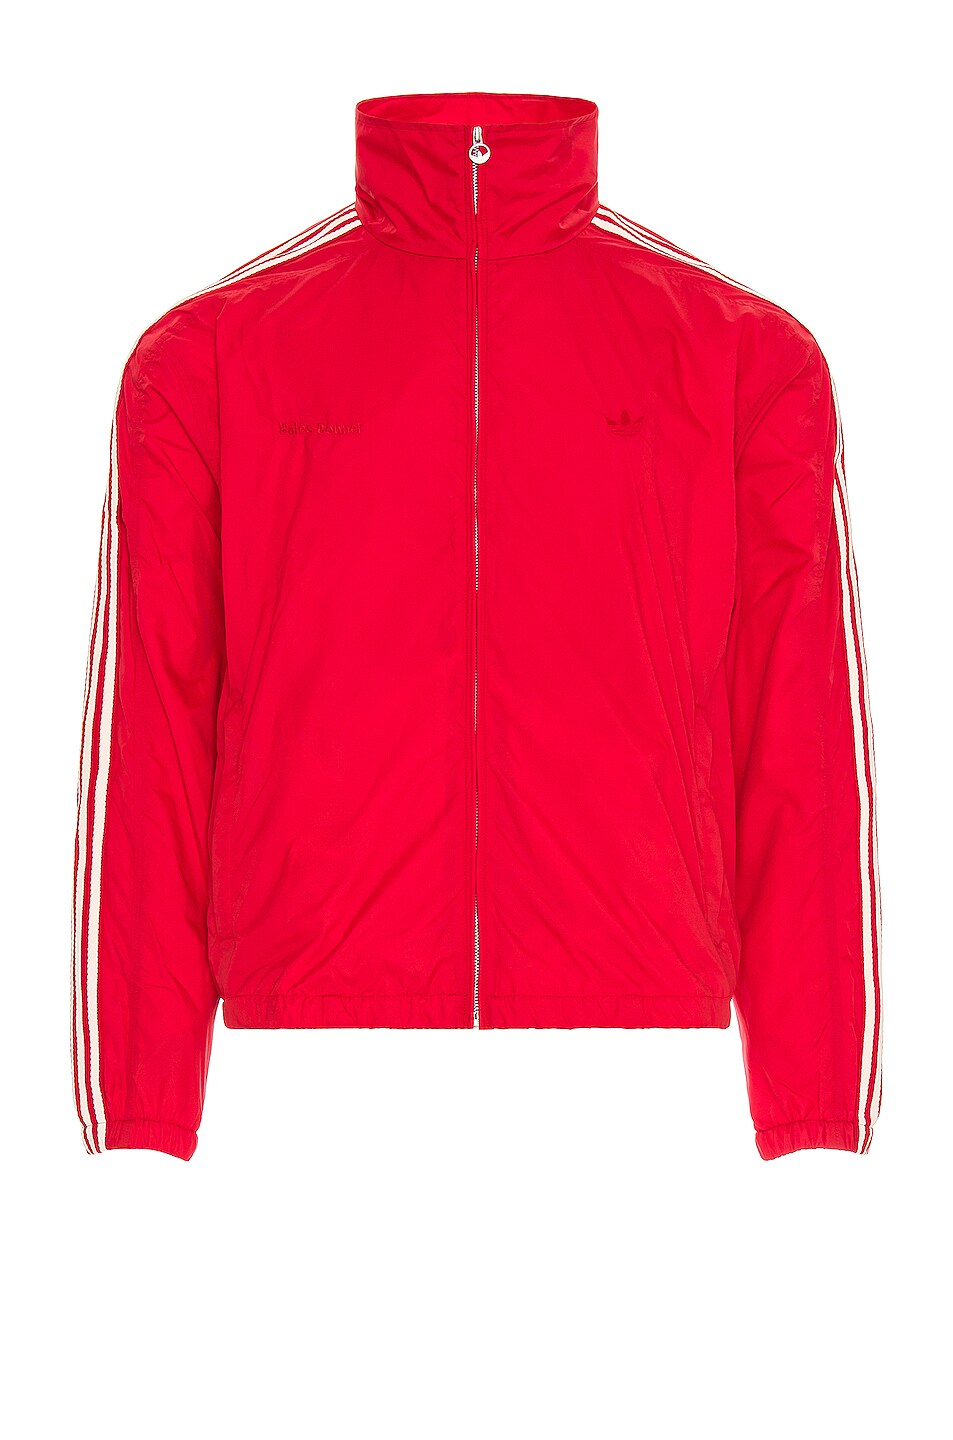 Image 1 of adidas by Wales Bonner Light Jacket in Scarlet